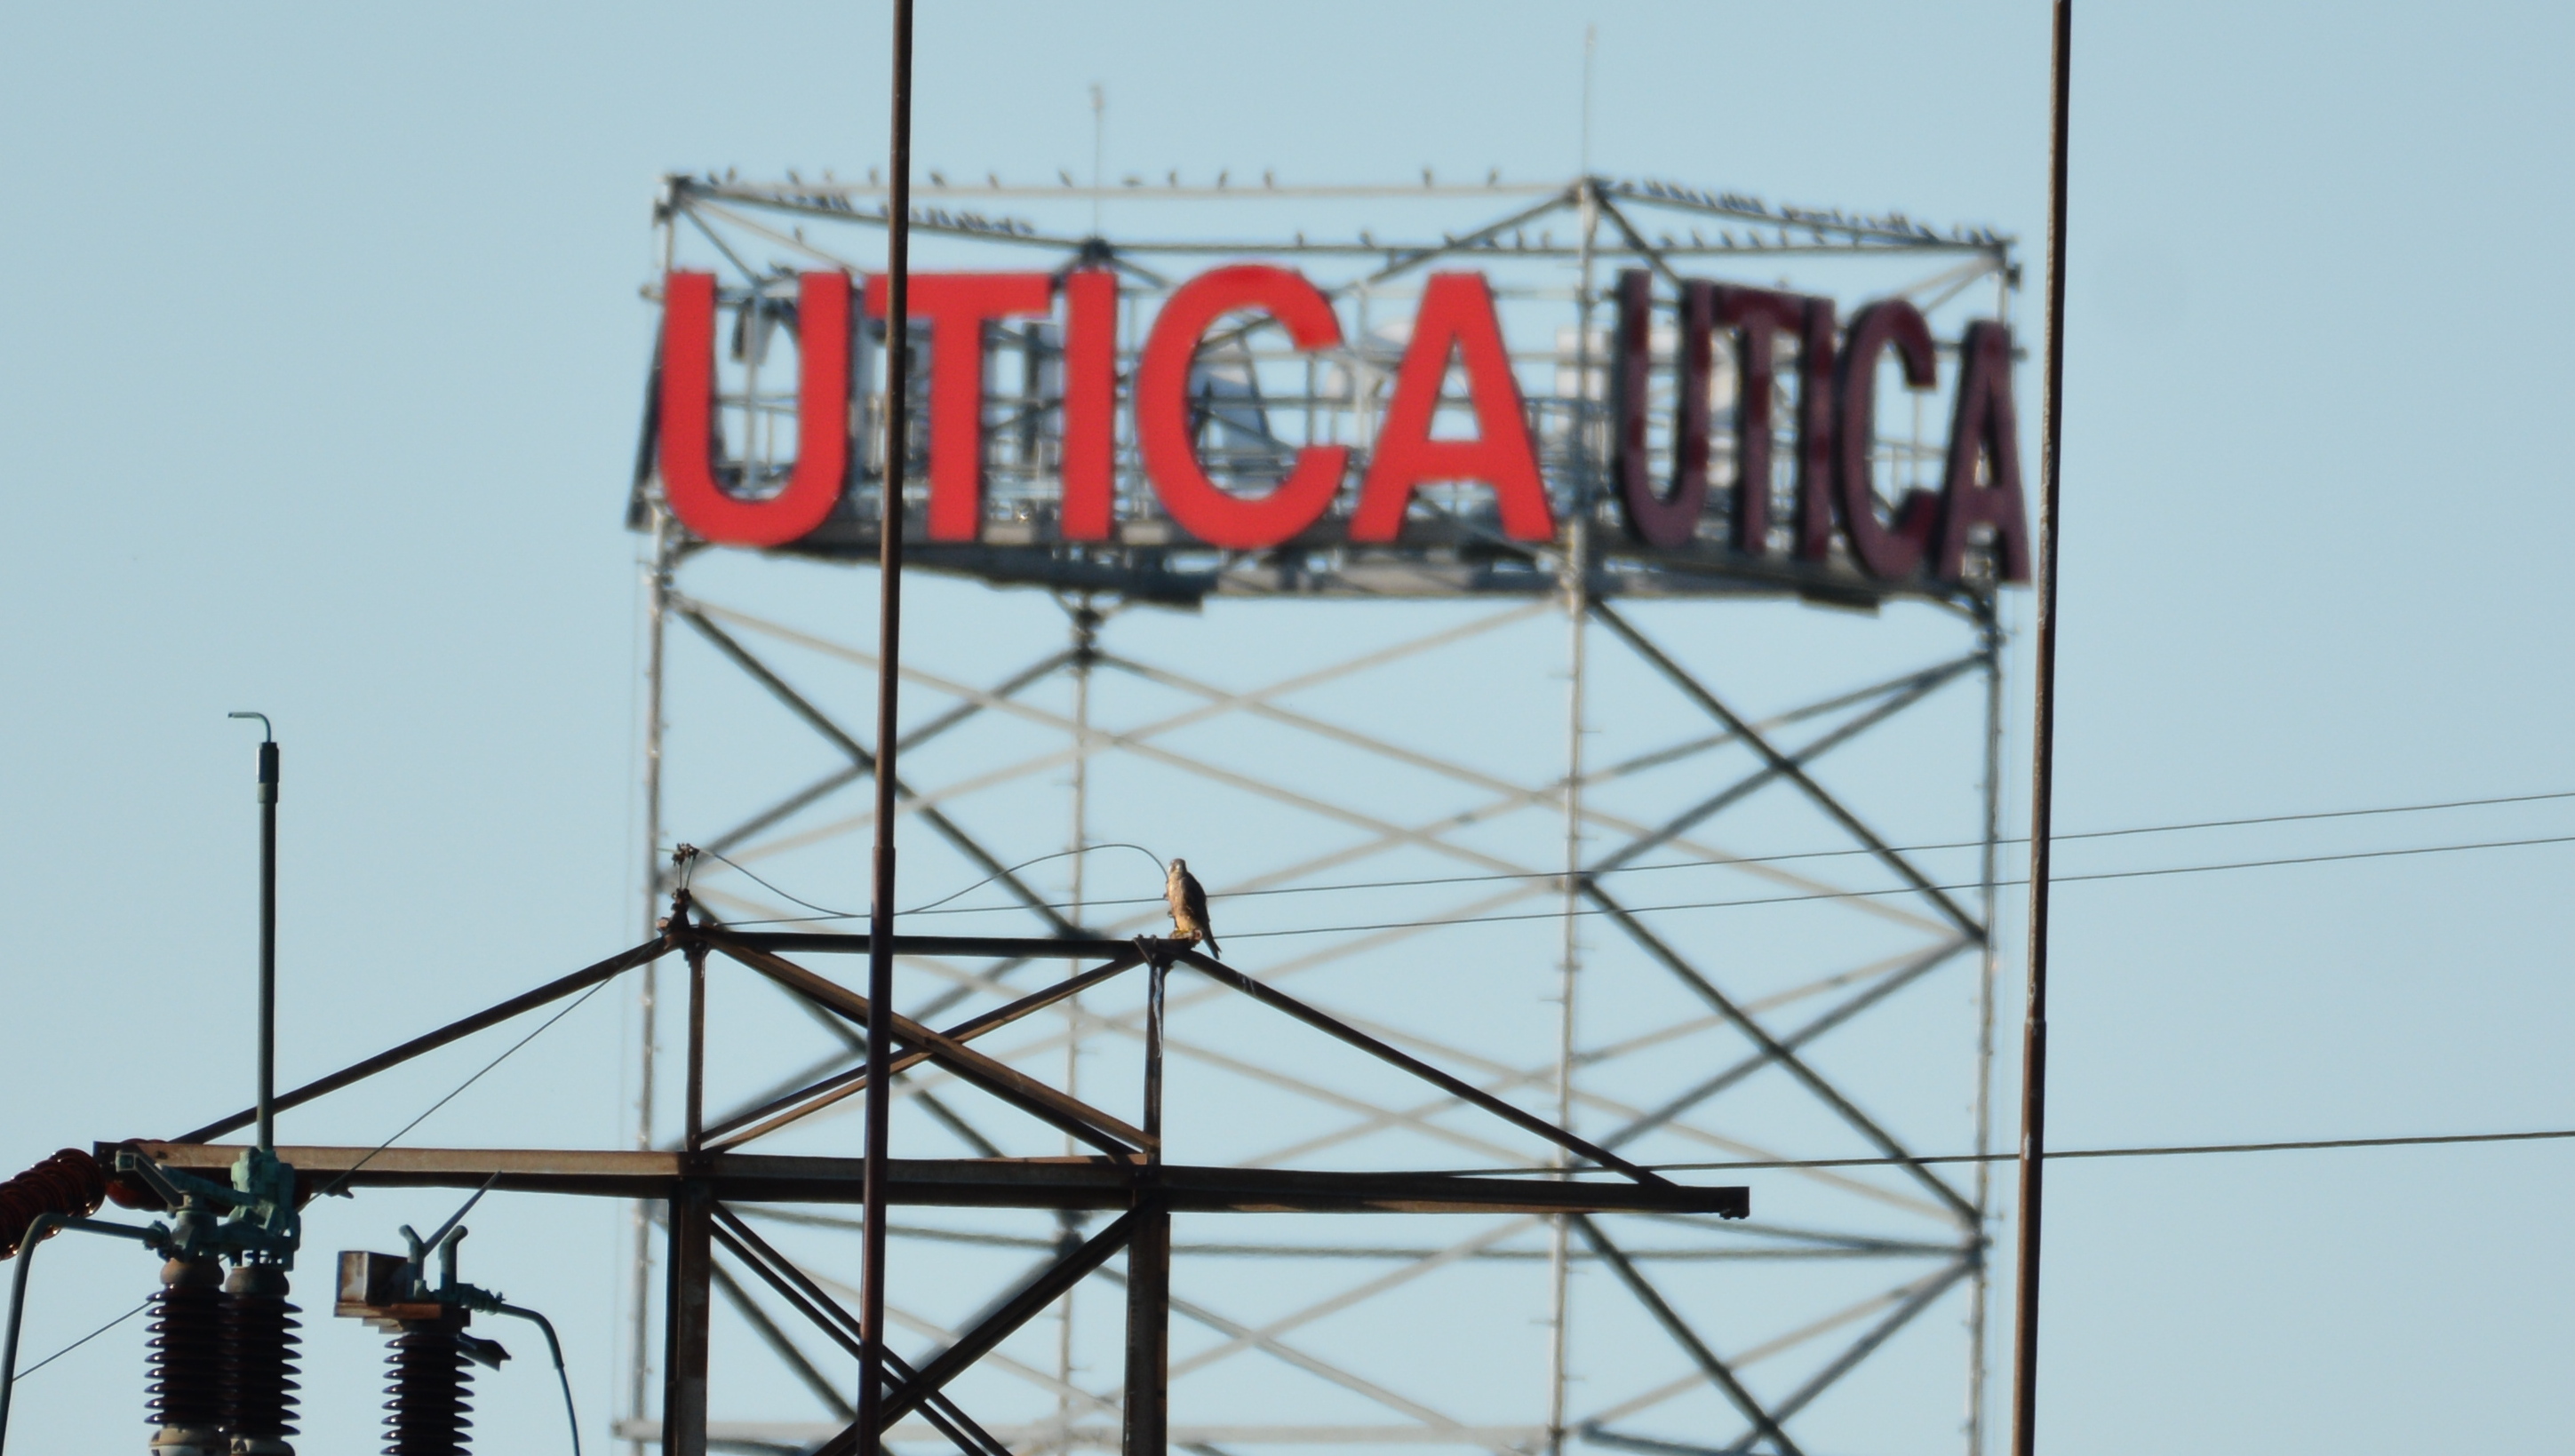 Perching on a tower with the Utica sign in the backround